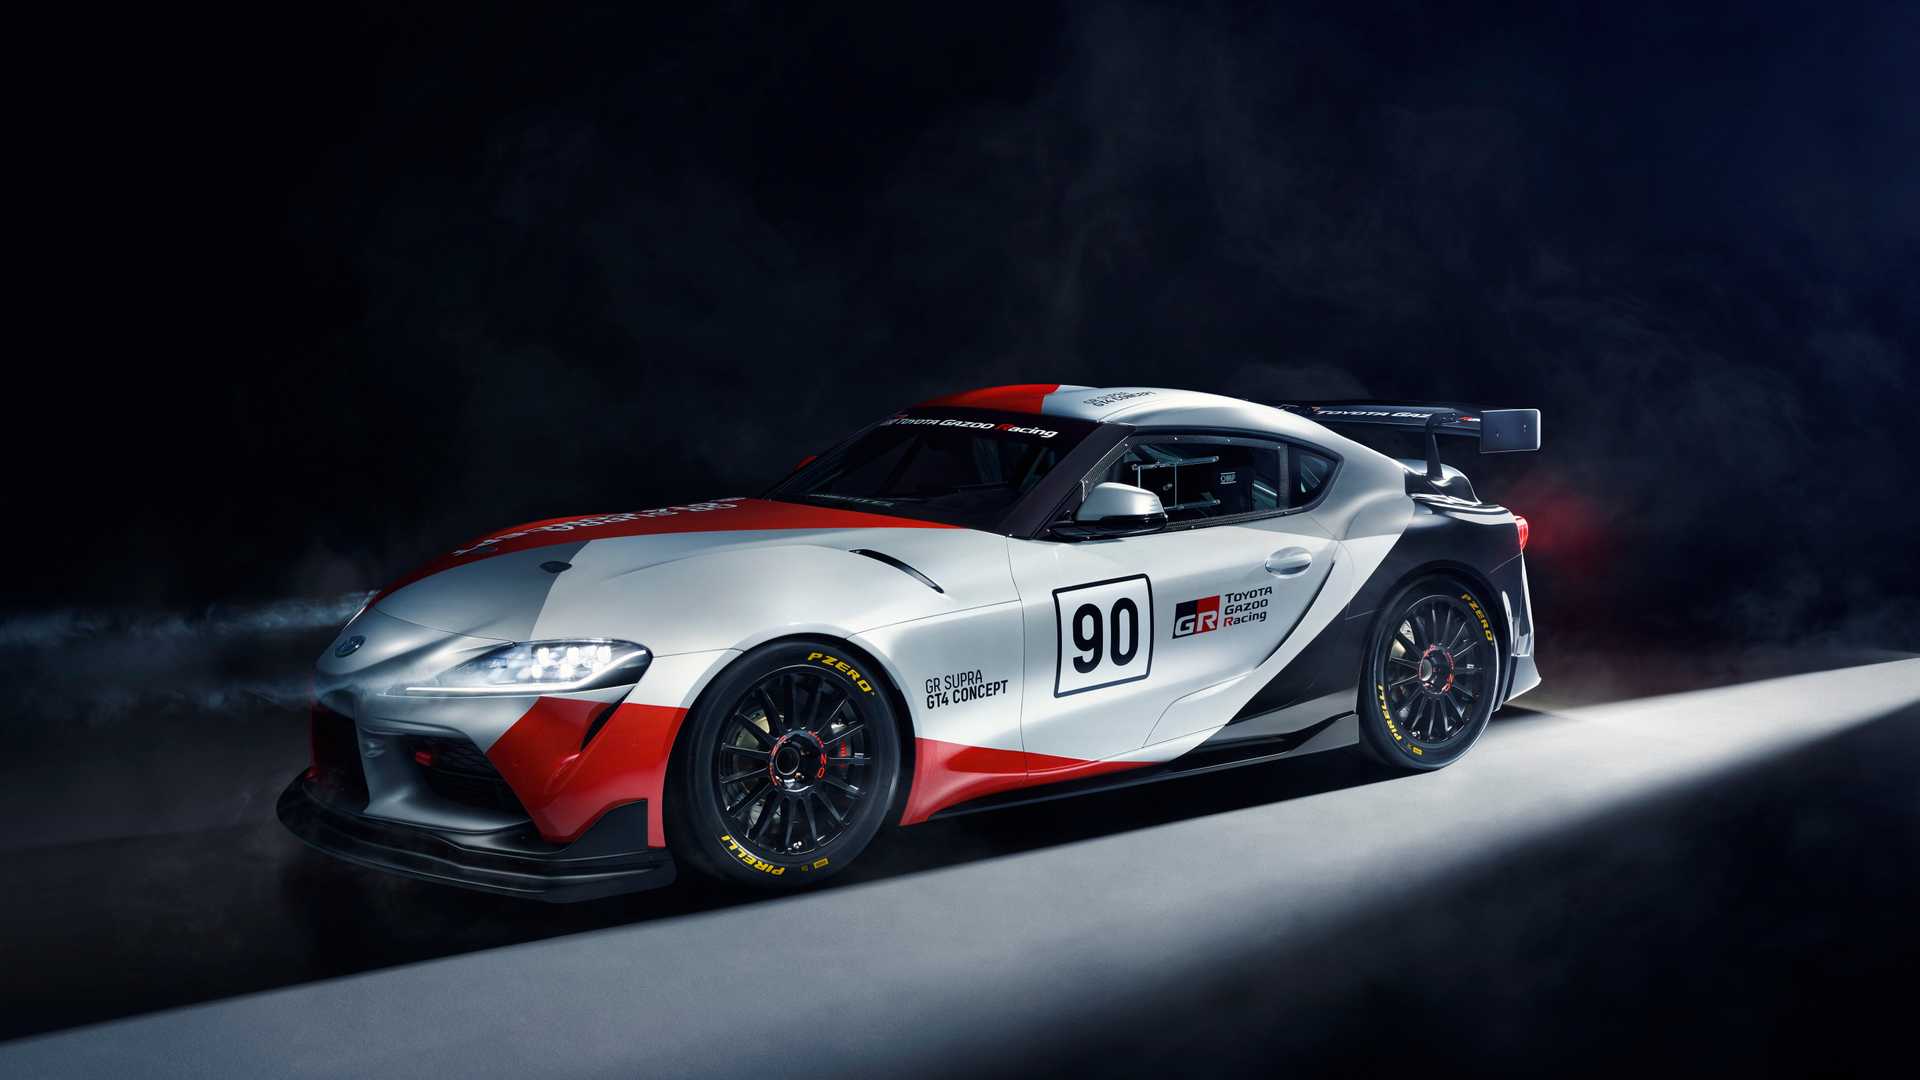 Toyota Gr Supra Gt4 Concept Unveiled With Racing Ambitions